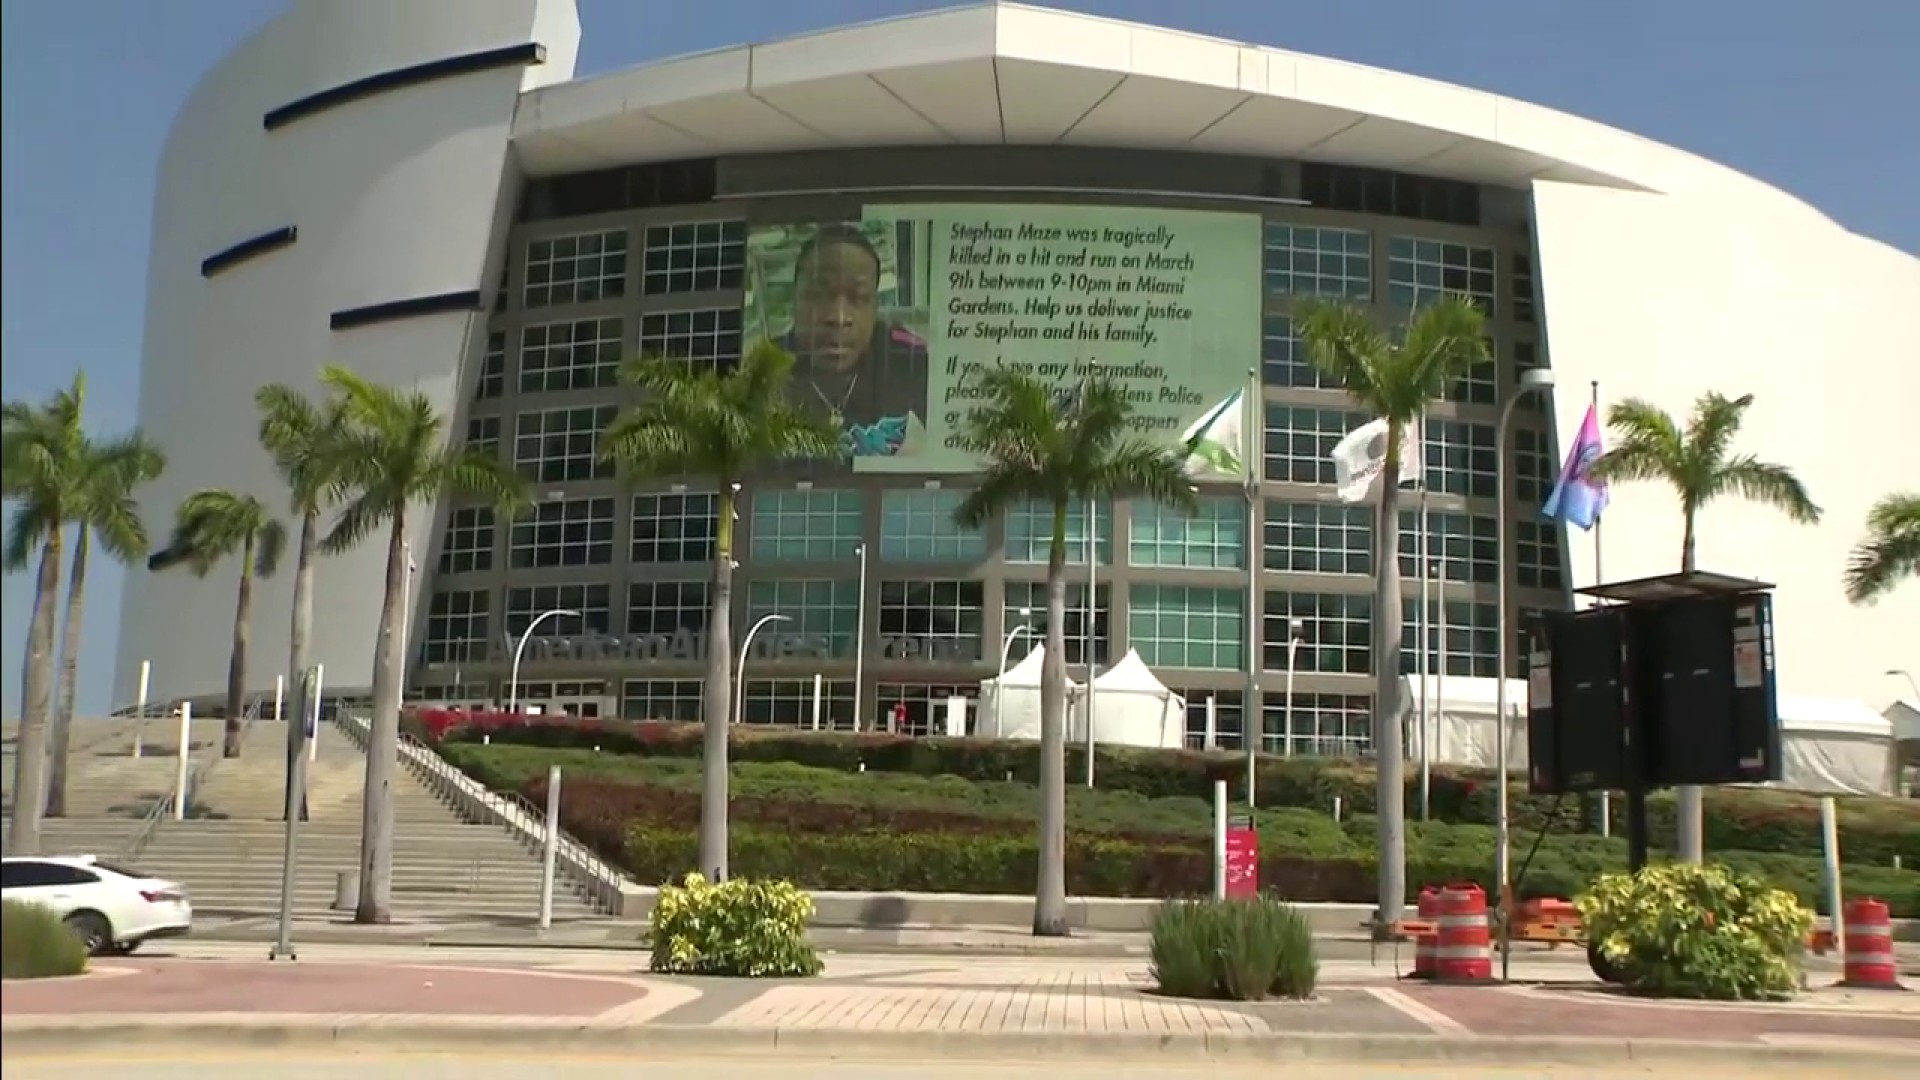 american airlines arena